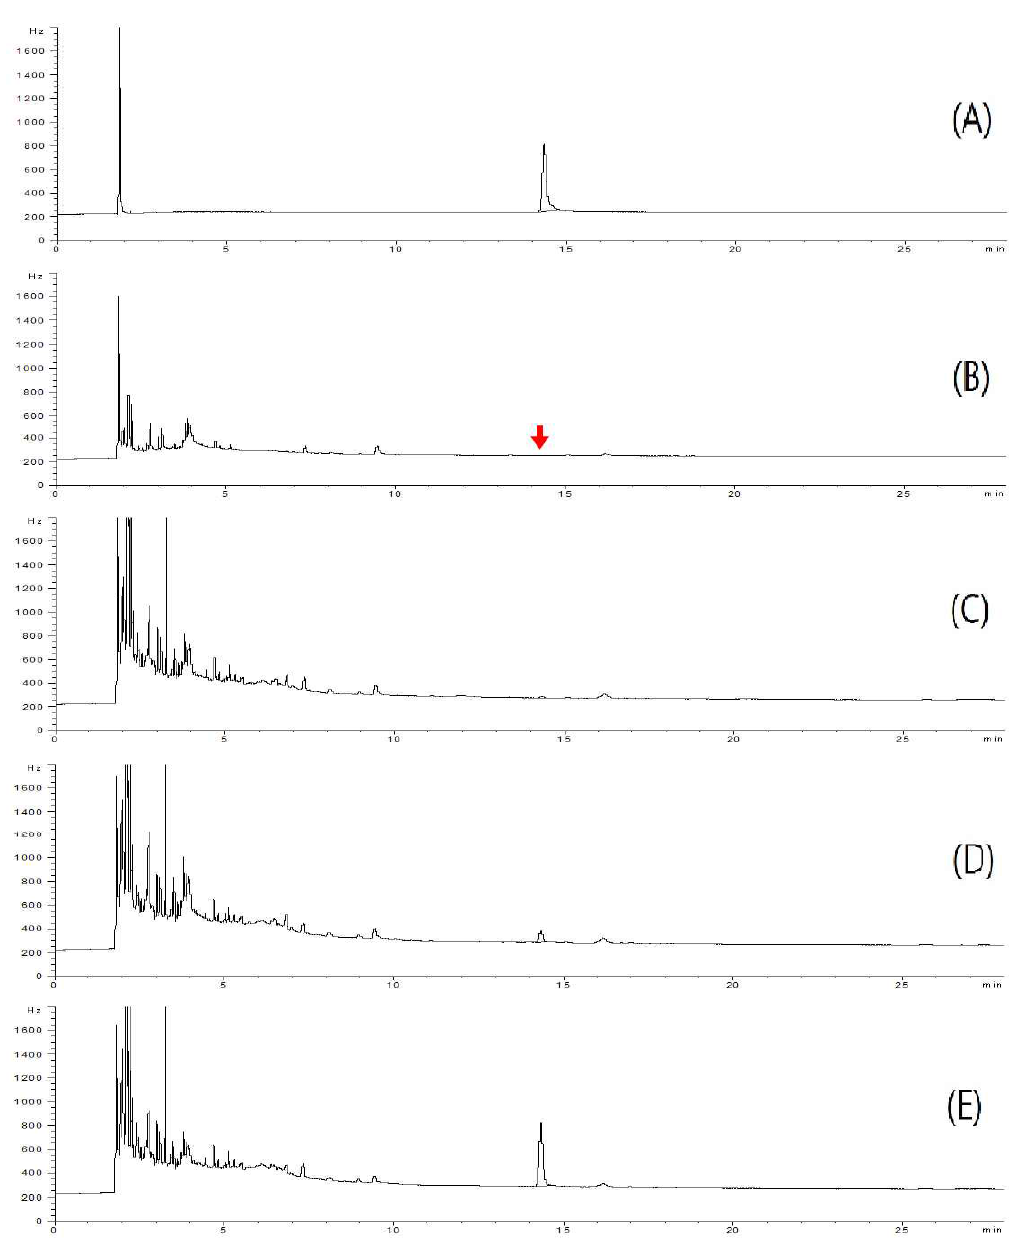 GC-ECD chromatograms corresponding to: A, standard solution at 0.5 mg/kg; B, control pepper; C, spiked at 0.01 mg/kg; D, spiked at 0.1 mg/kg; and E, spiked at 0.5 mg/kg